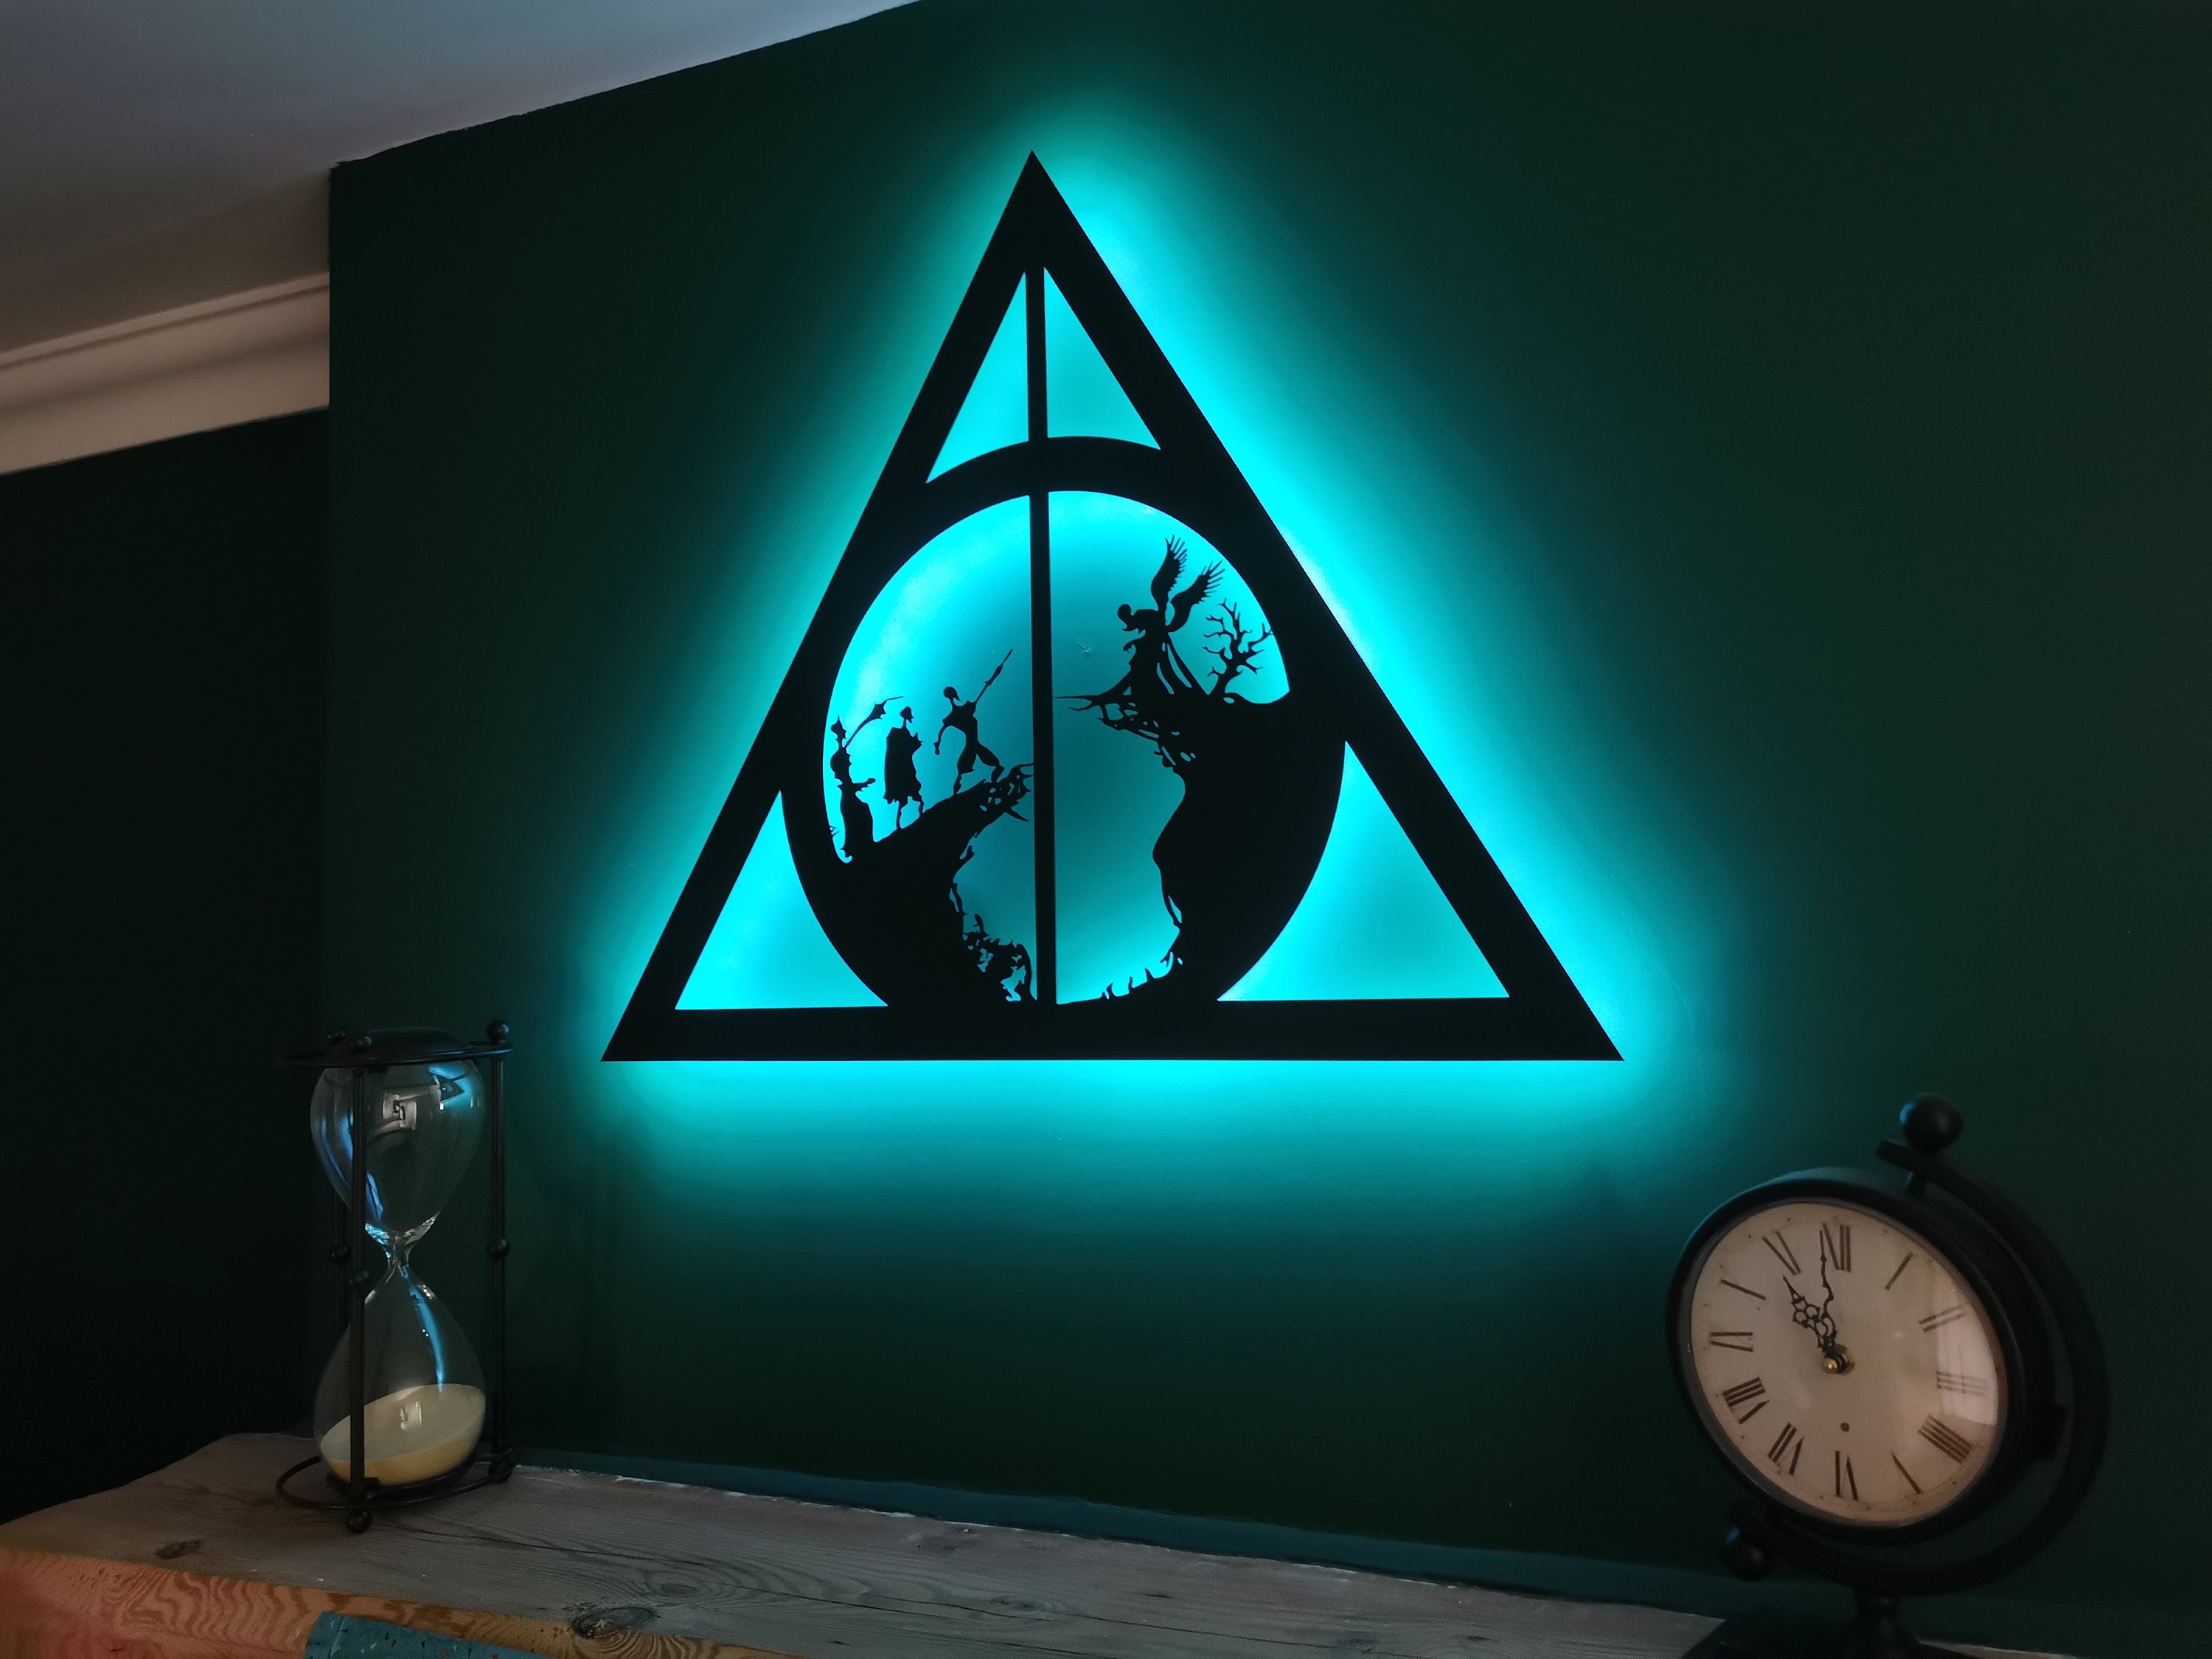 Harry Potter Themed Deathly Hallows Lamp Harry Potter Gift Industrial  Lighting Bedside Lamp Wizardry Lamp 